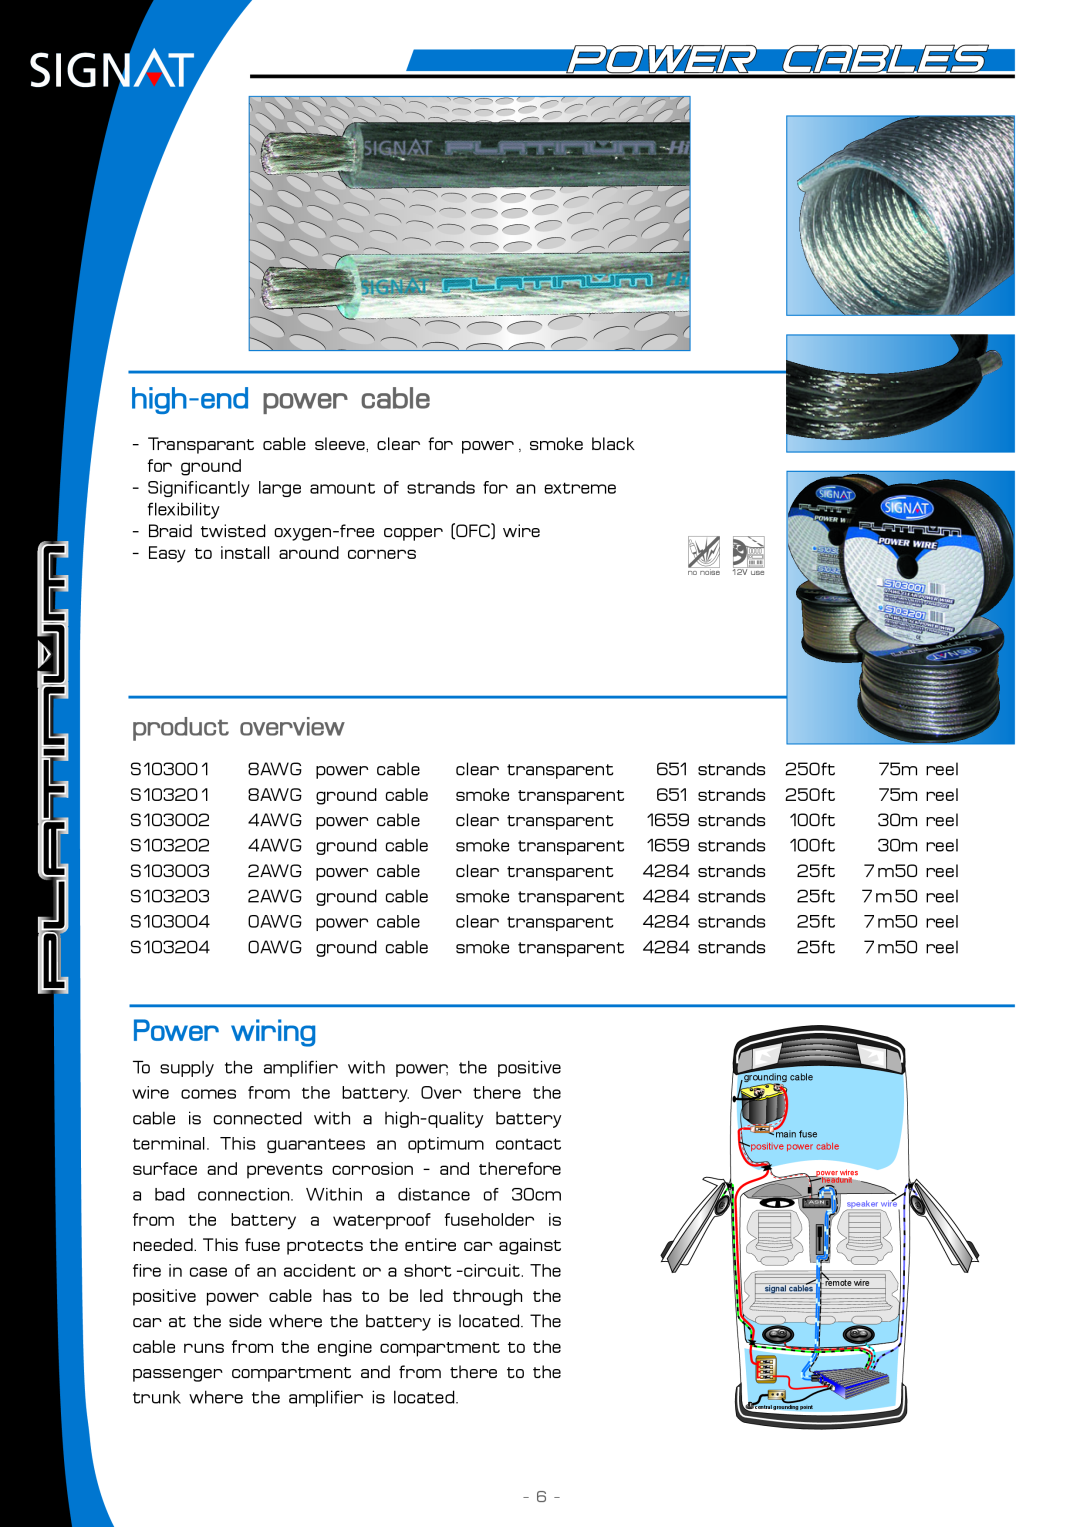 Signat S104201, S104001, S104105 manual high-end power cable, Power wiring, product overview 